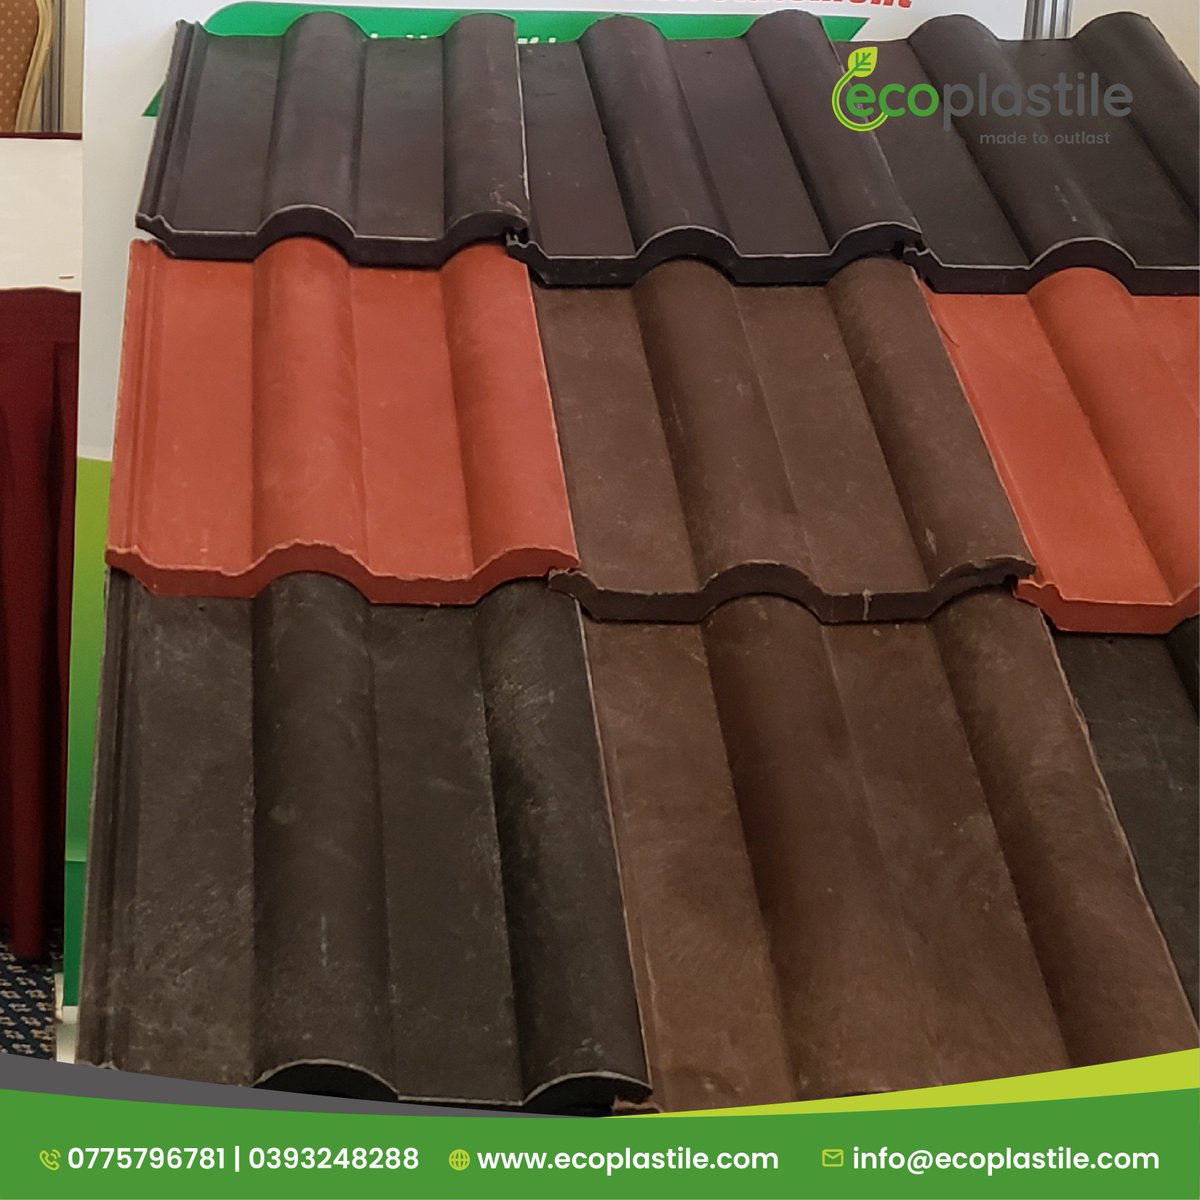 Are you in the market for new roofing?  Roofing tiles from plastic waste is what you've been waiting for. Make a positive impact on the environment by reducing plastic waste, through supporting and purchasing roofing tiles from @Ecoplastile . @FrancKamugyisha